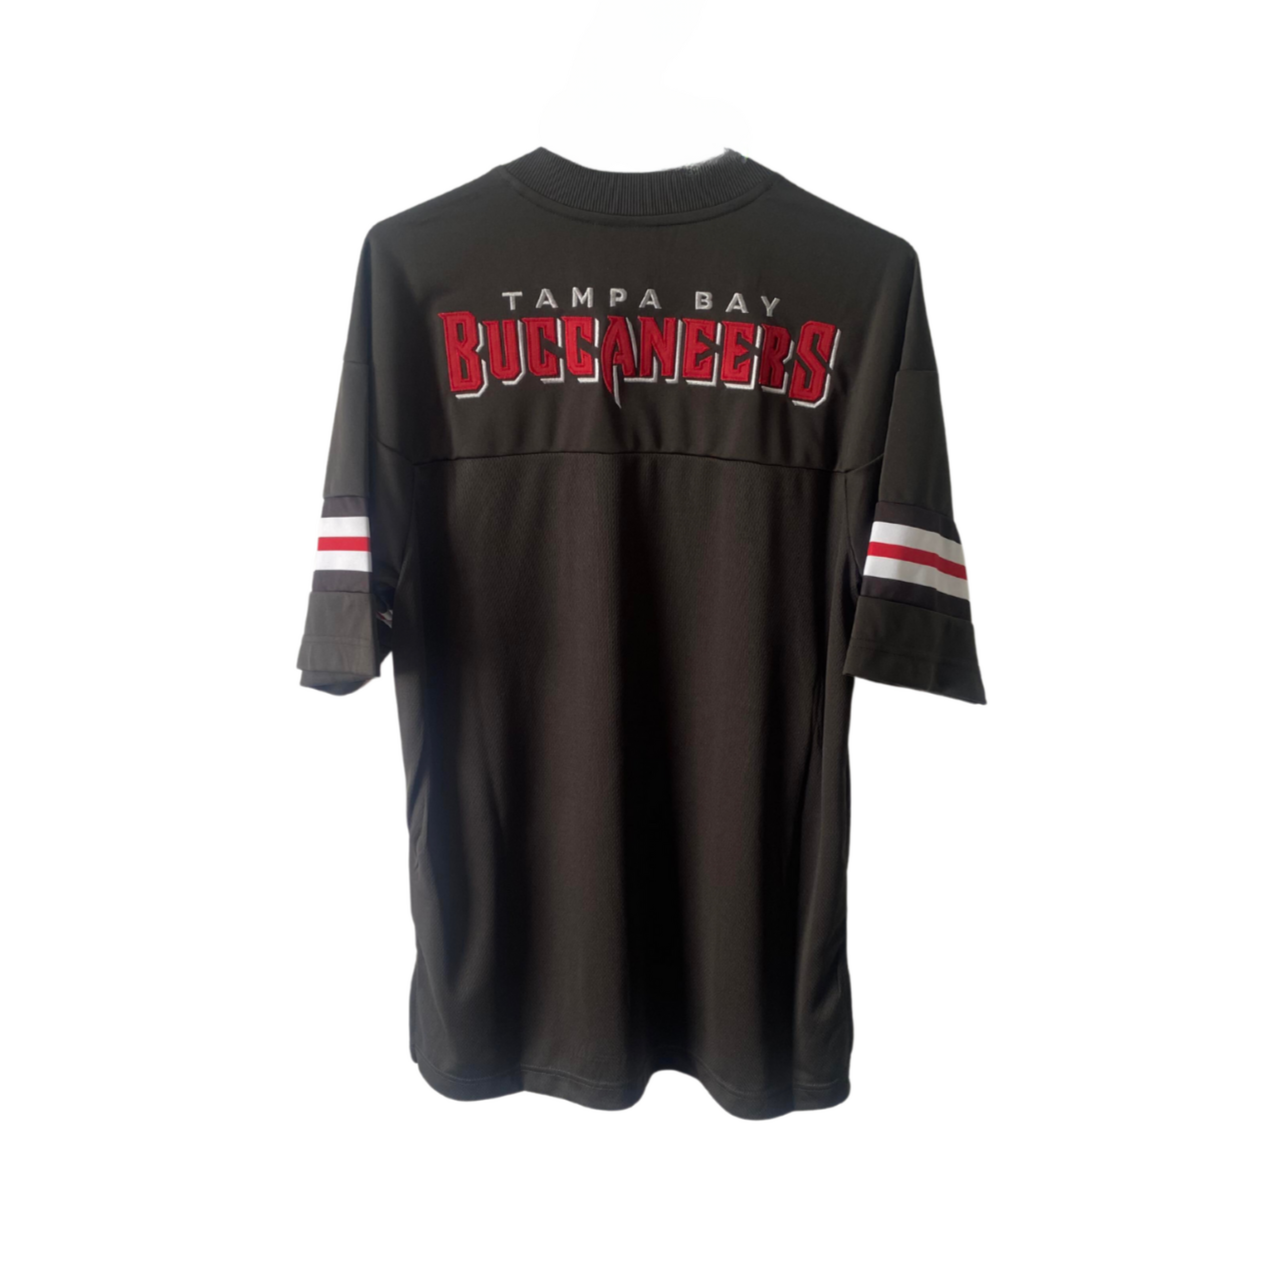 Tampa Bay Buccaneers Warmup Jersey (S)